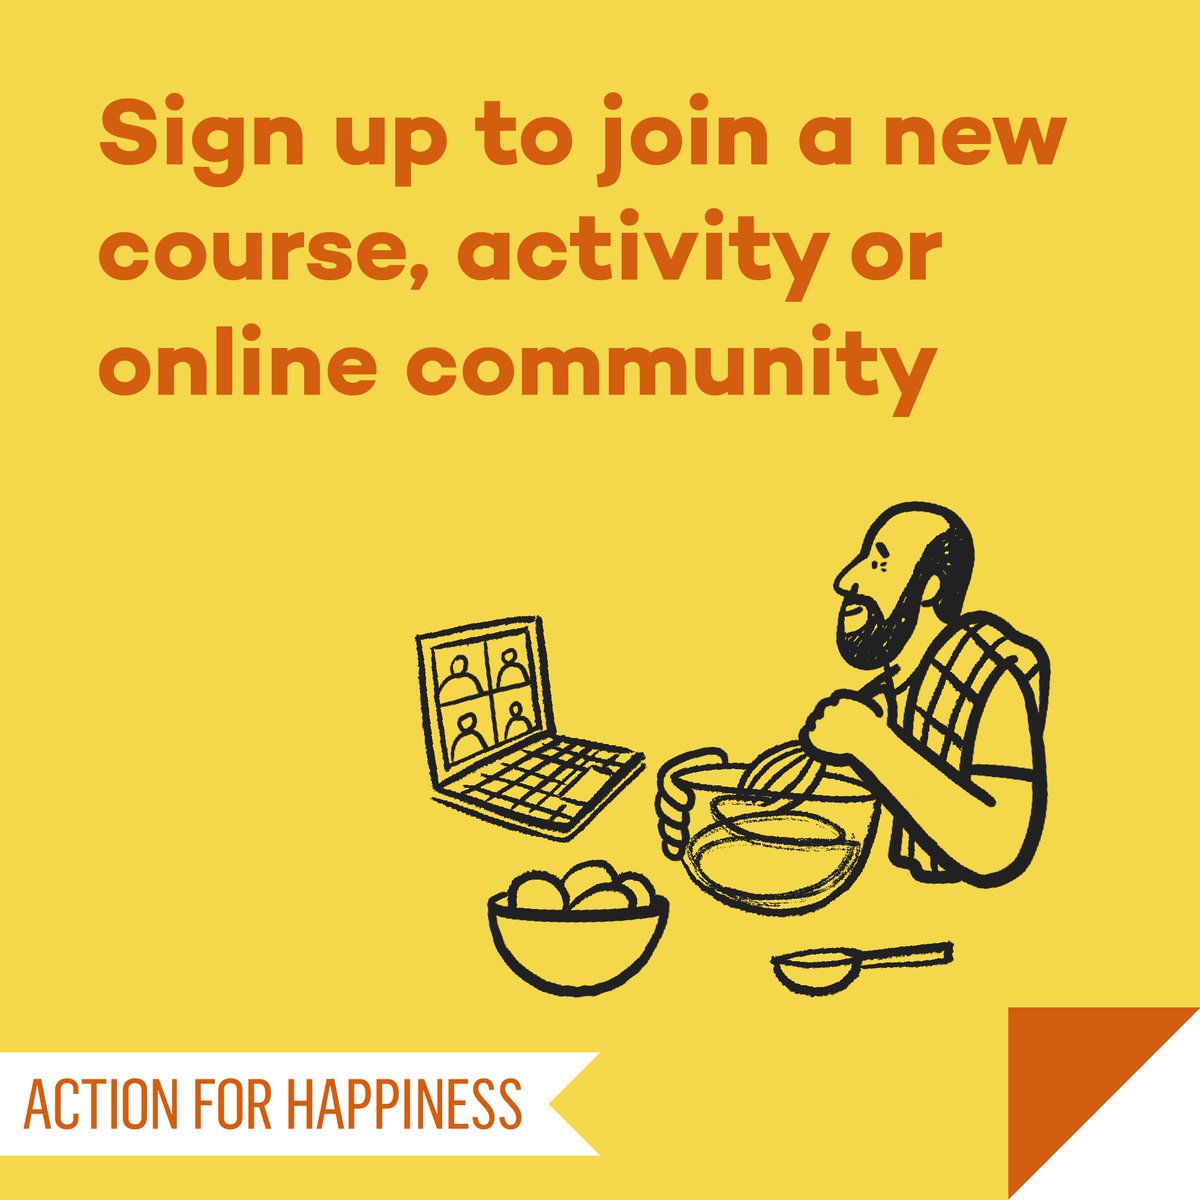 Try a new activity or approach this #NewWaysNovember with tips and inspiration from @actionhappiness to boost your resilience and wellbeing.
😊
actionforhappiness.org/calendar

⭐Set a goal
📝Make a list
🎨Be creative
🗨️Join a group
💻Sign up for a course

😊#FamilyWellbeing